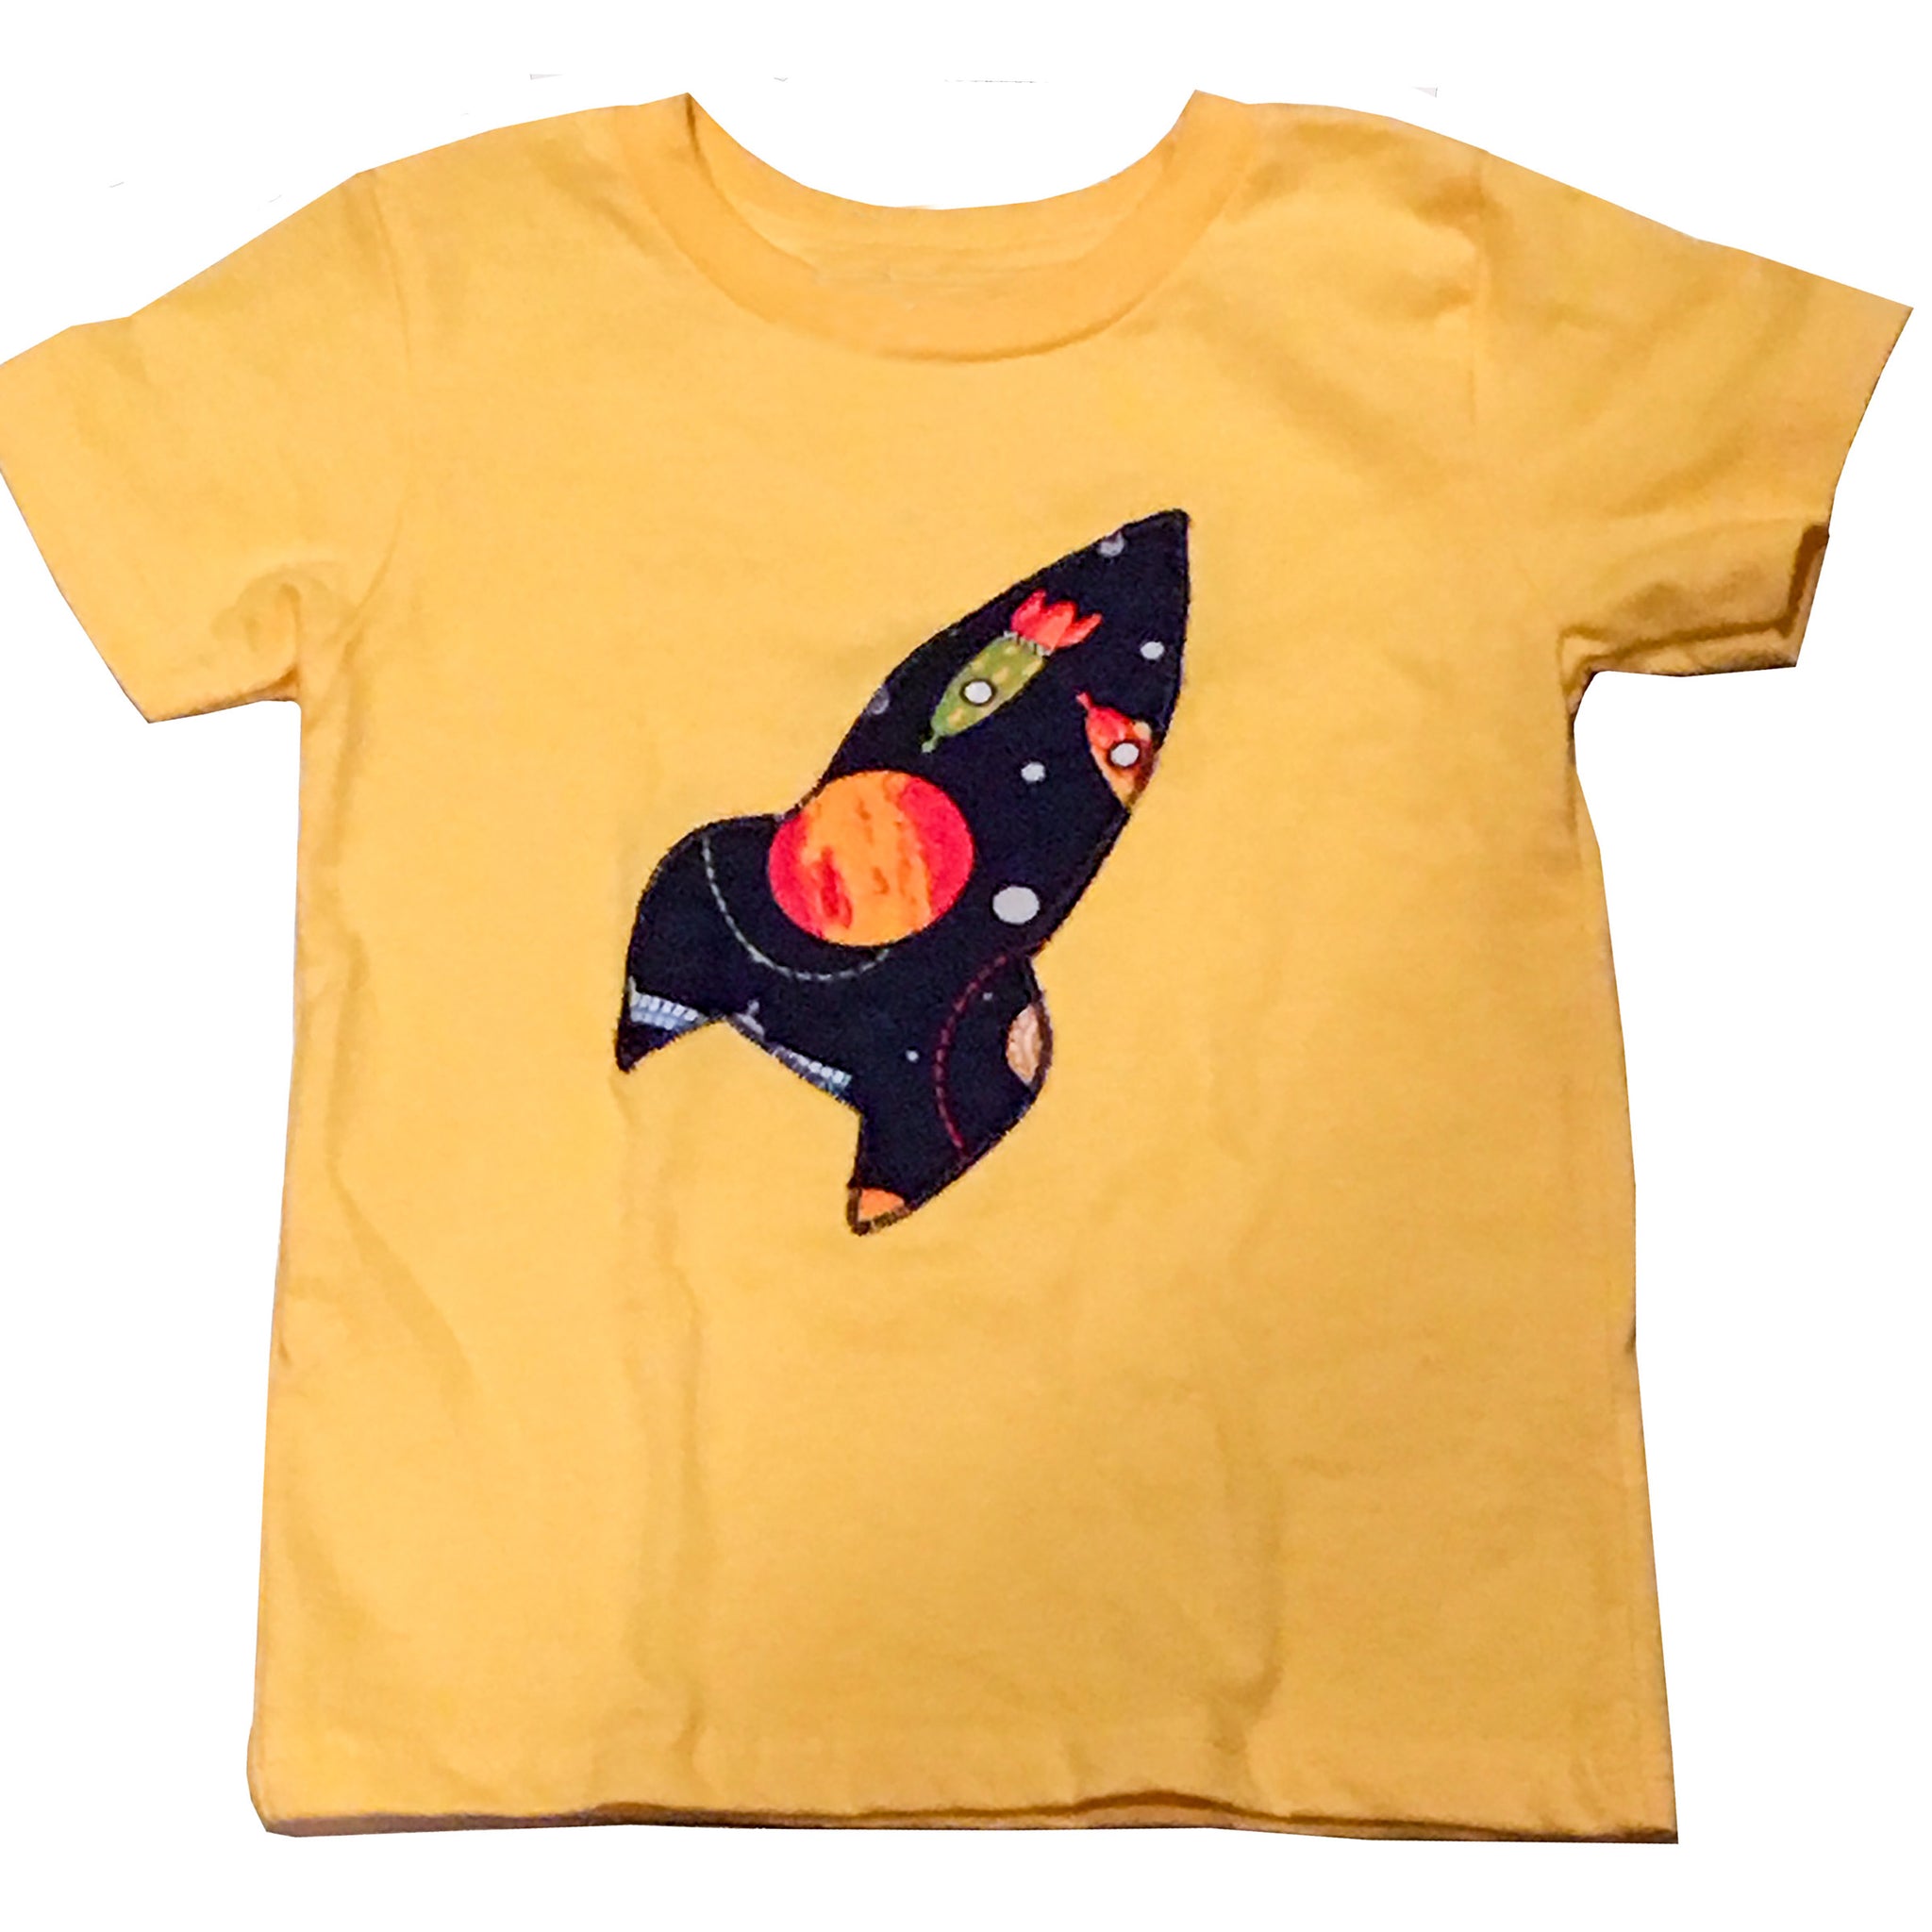 To the moon and stars and back! T-shirt Yellow